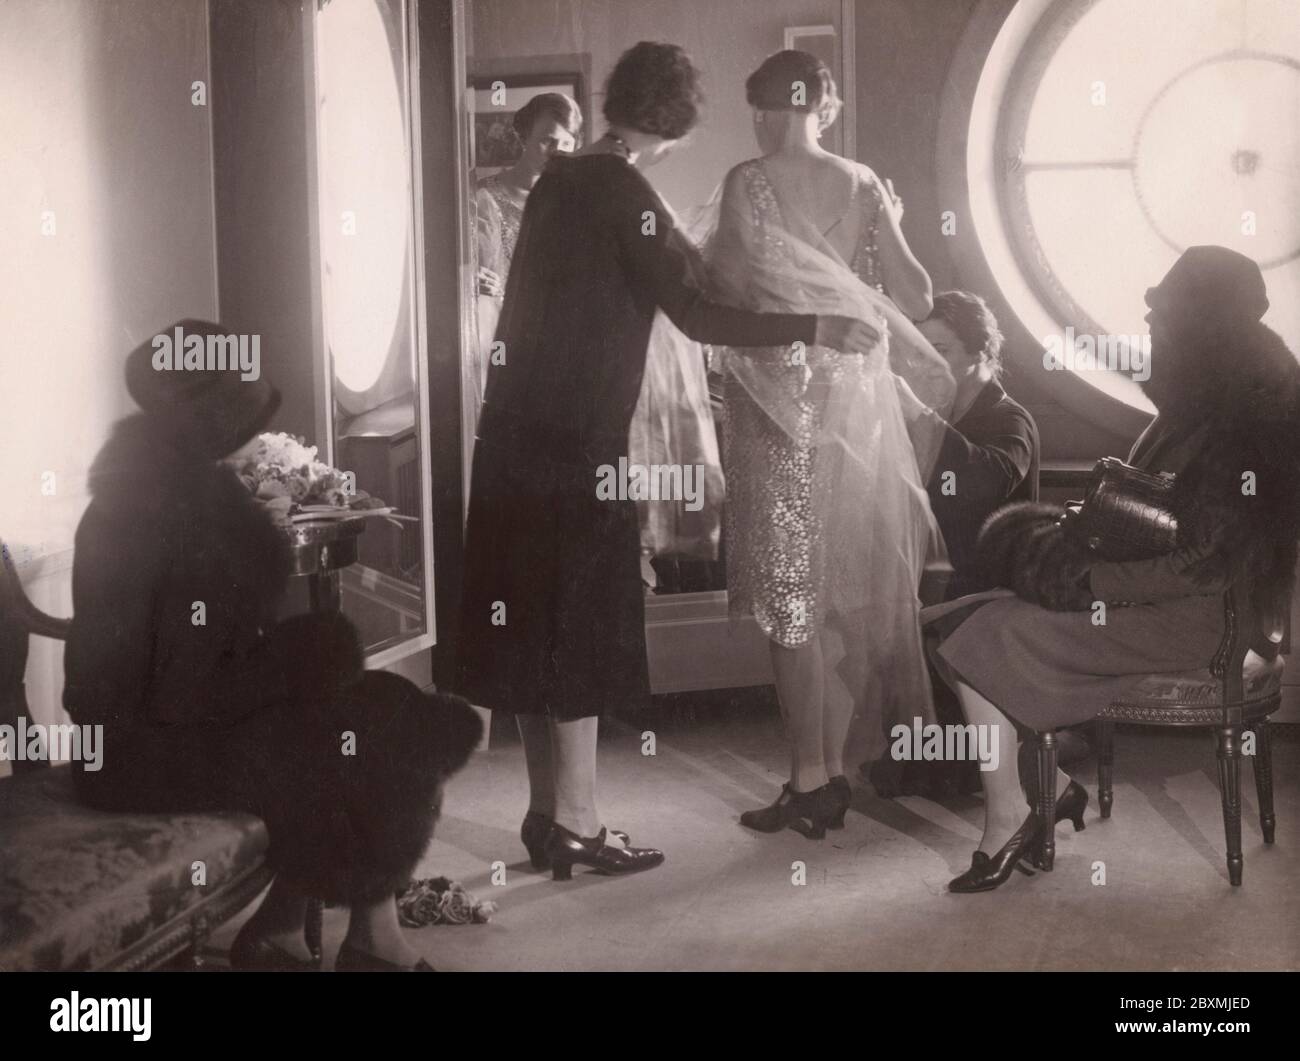 Back in the 1920s. At the department store NK in Stockholm, a woman is standing in front of a mirror trying on a dress. Two women of the staff is adjusting details to make it fit perfectly. Perhaps a dress for a celebration or a party, it is the roaring twenties after all. Stock Photo